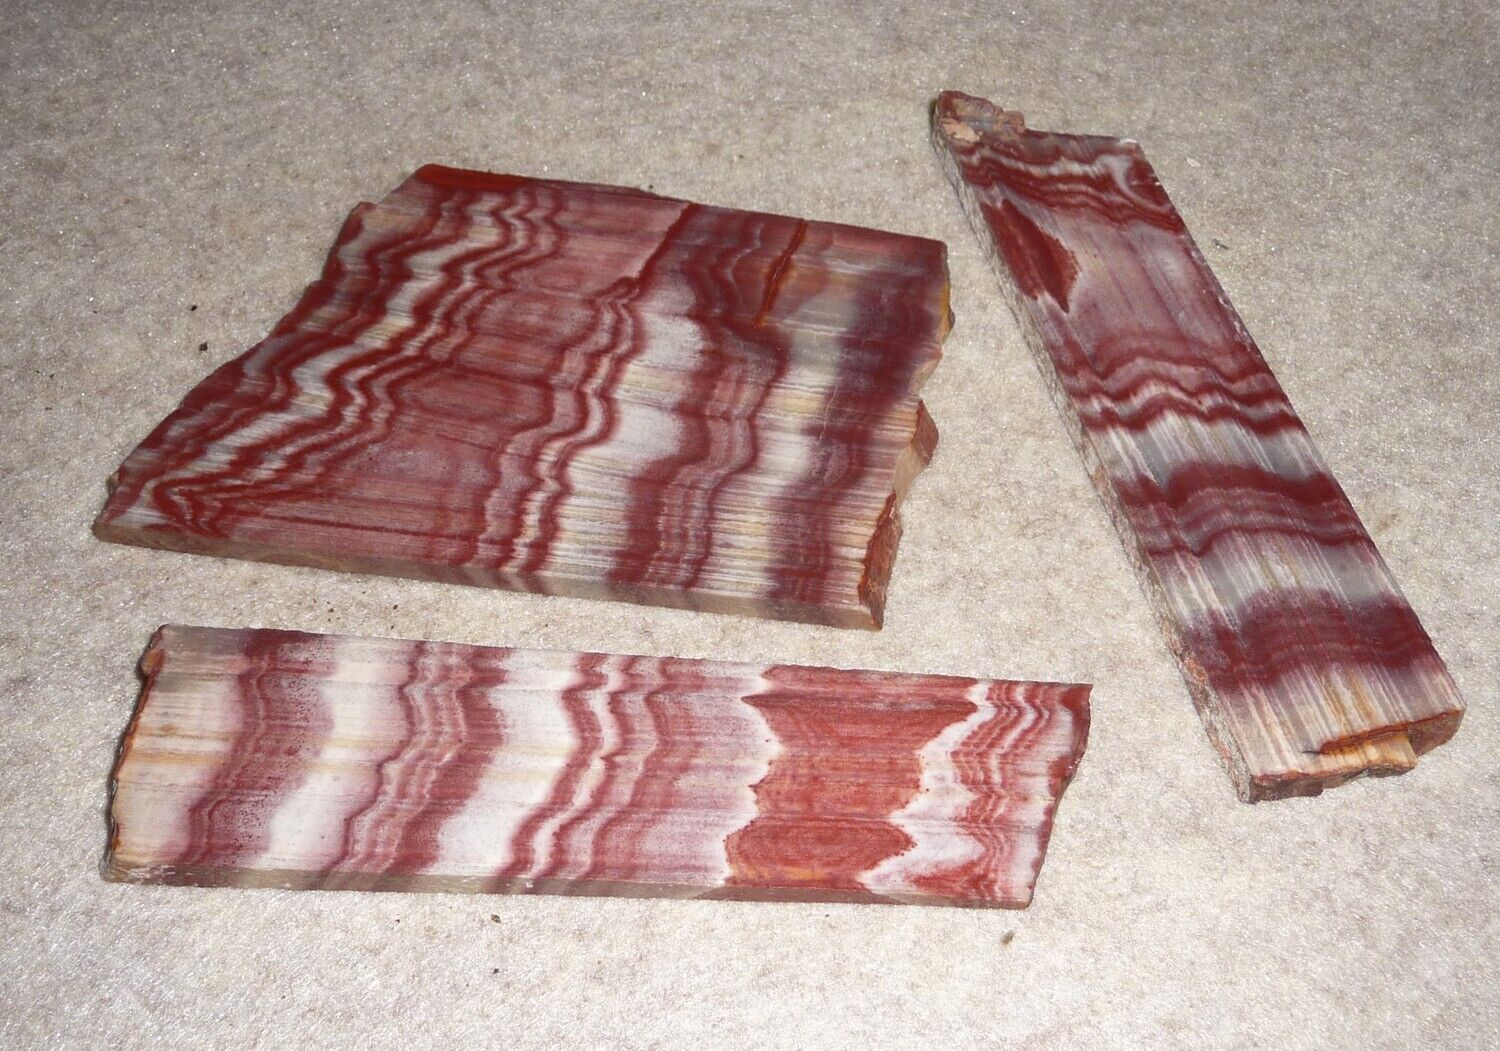 4 Small Striped Red and White Wonderstone  slabs